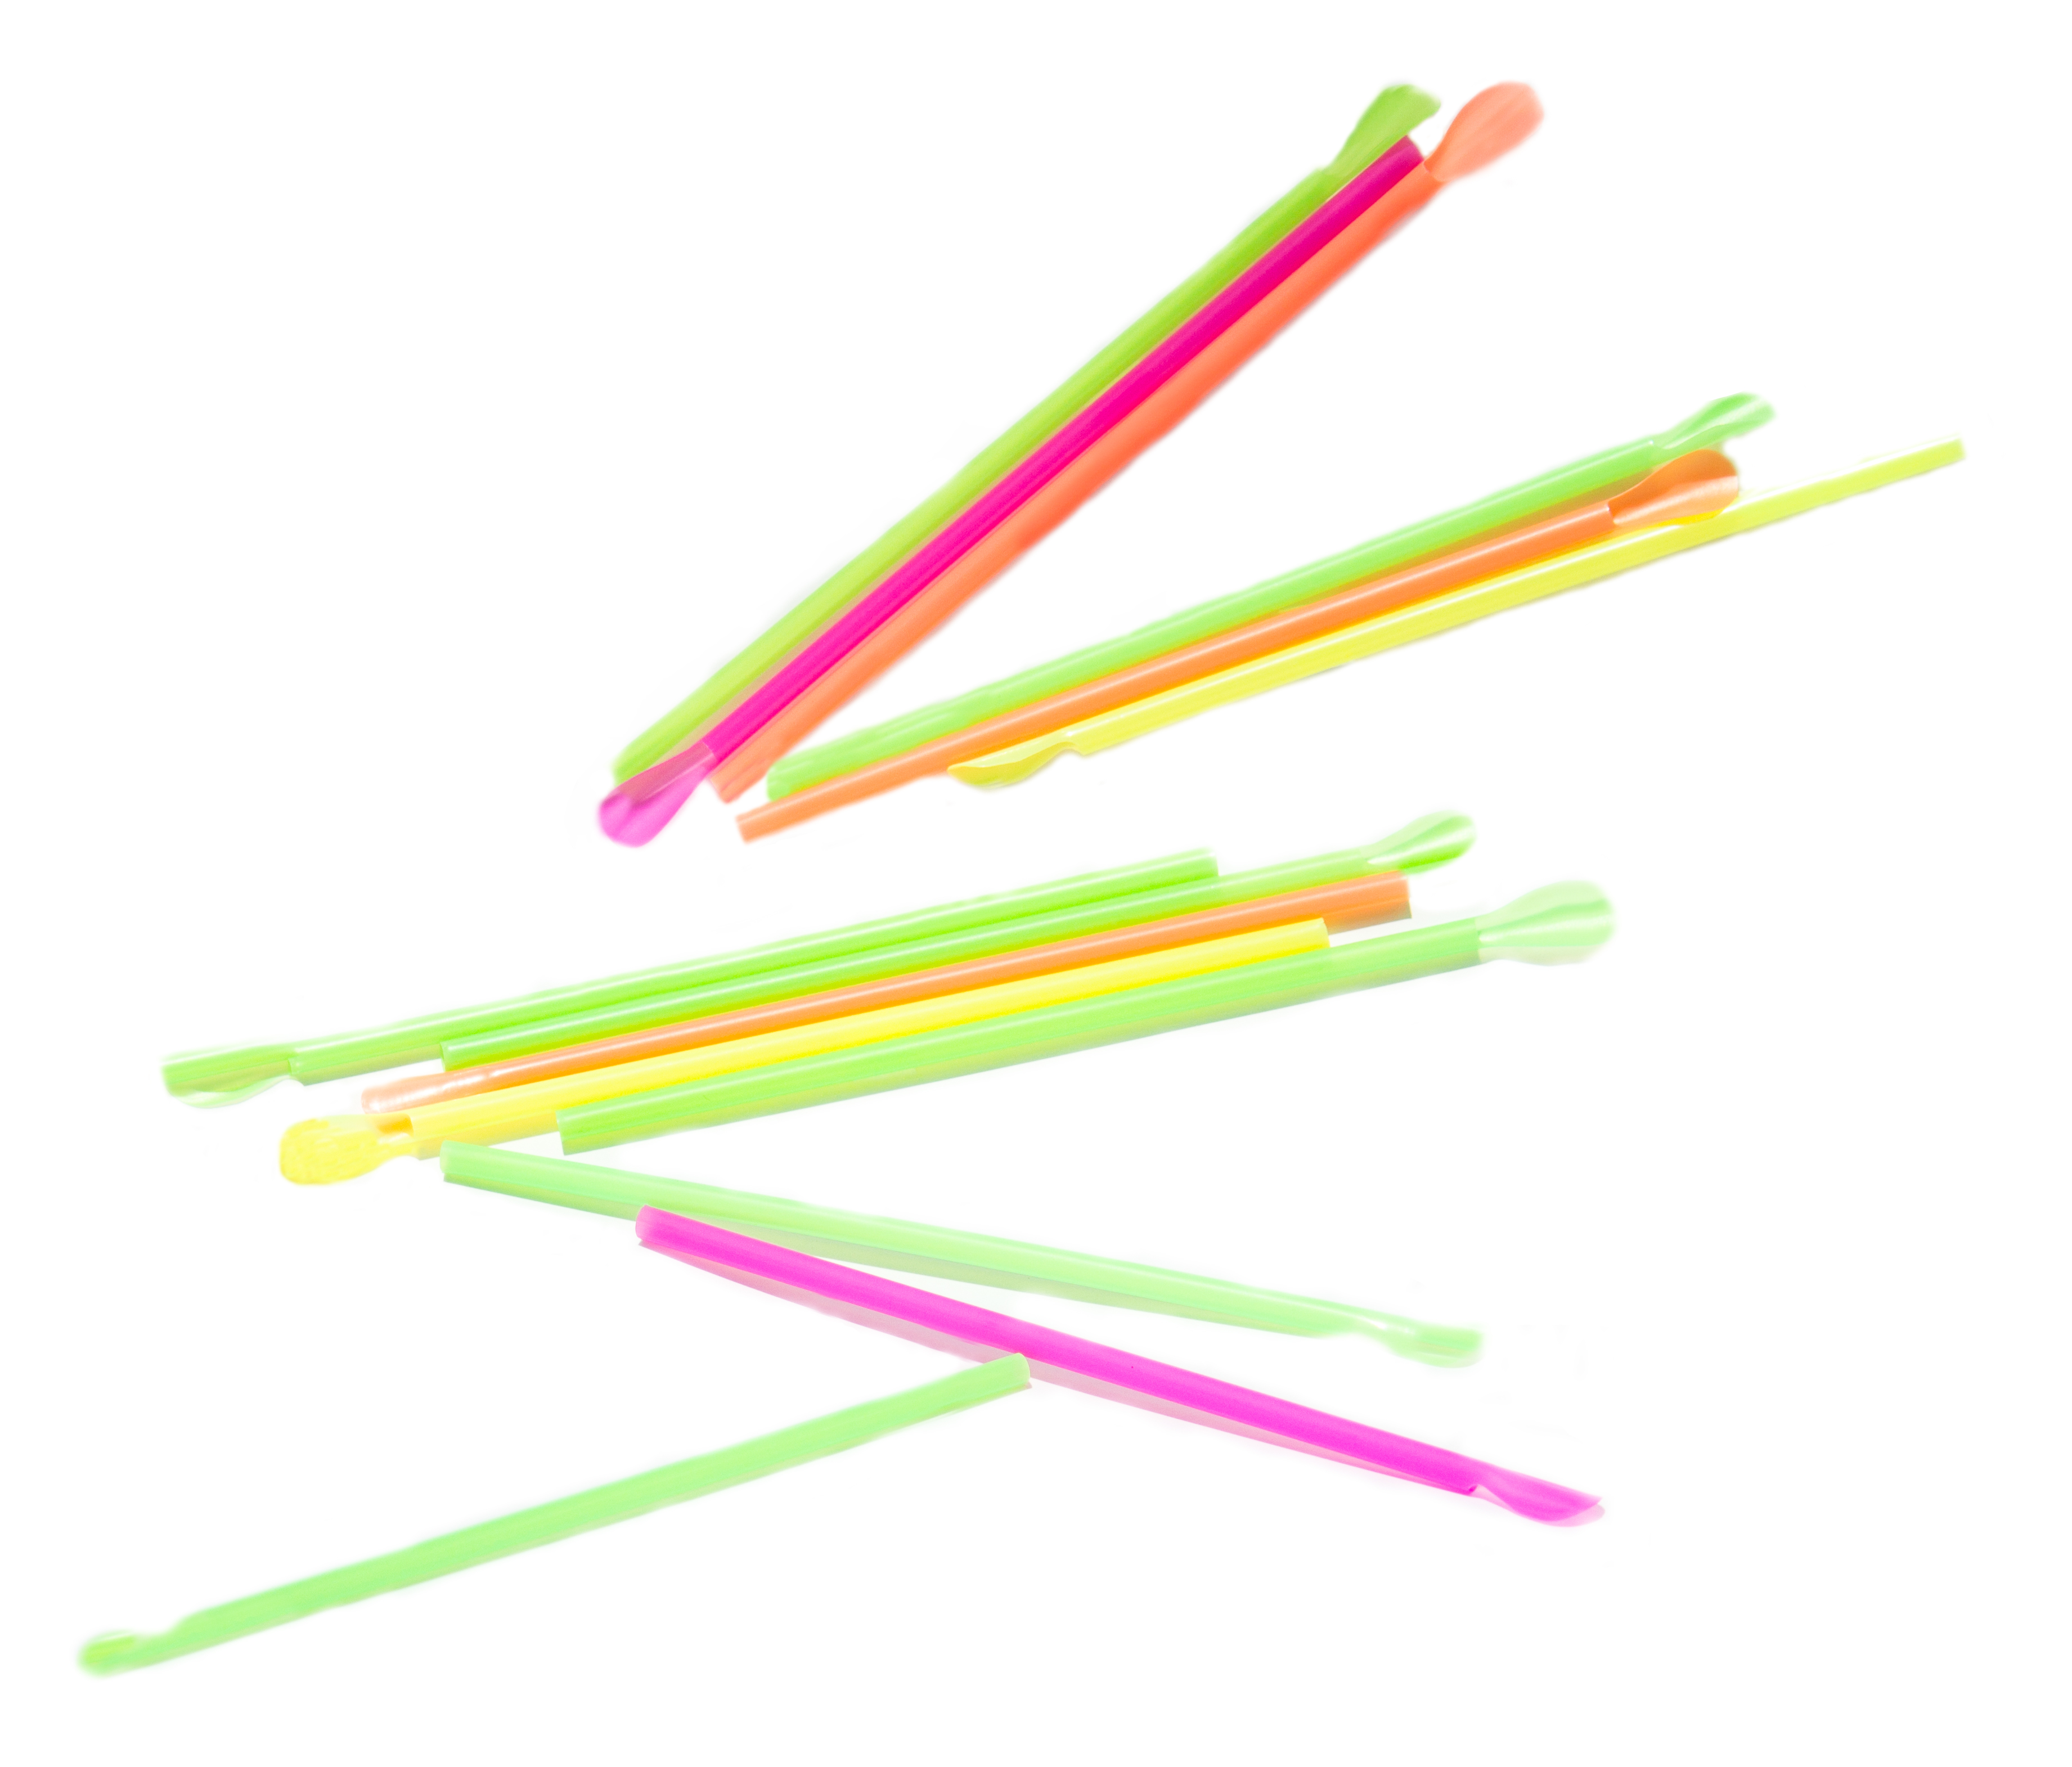 8" Neon Unwrapped Spoon Straws Assorted Colors Box of 4 boxes/400ct = 1600ct